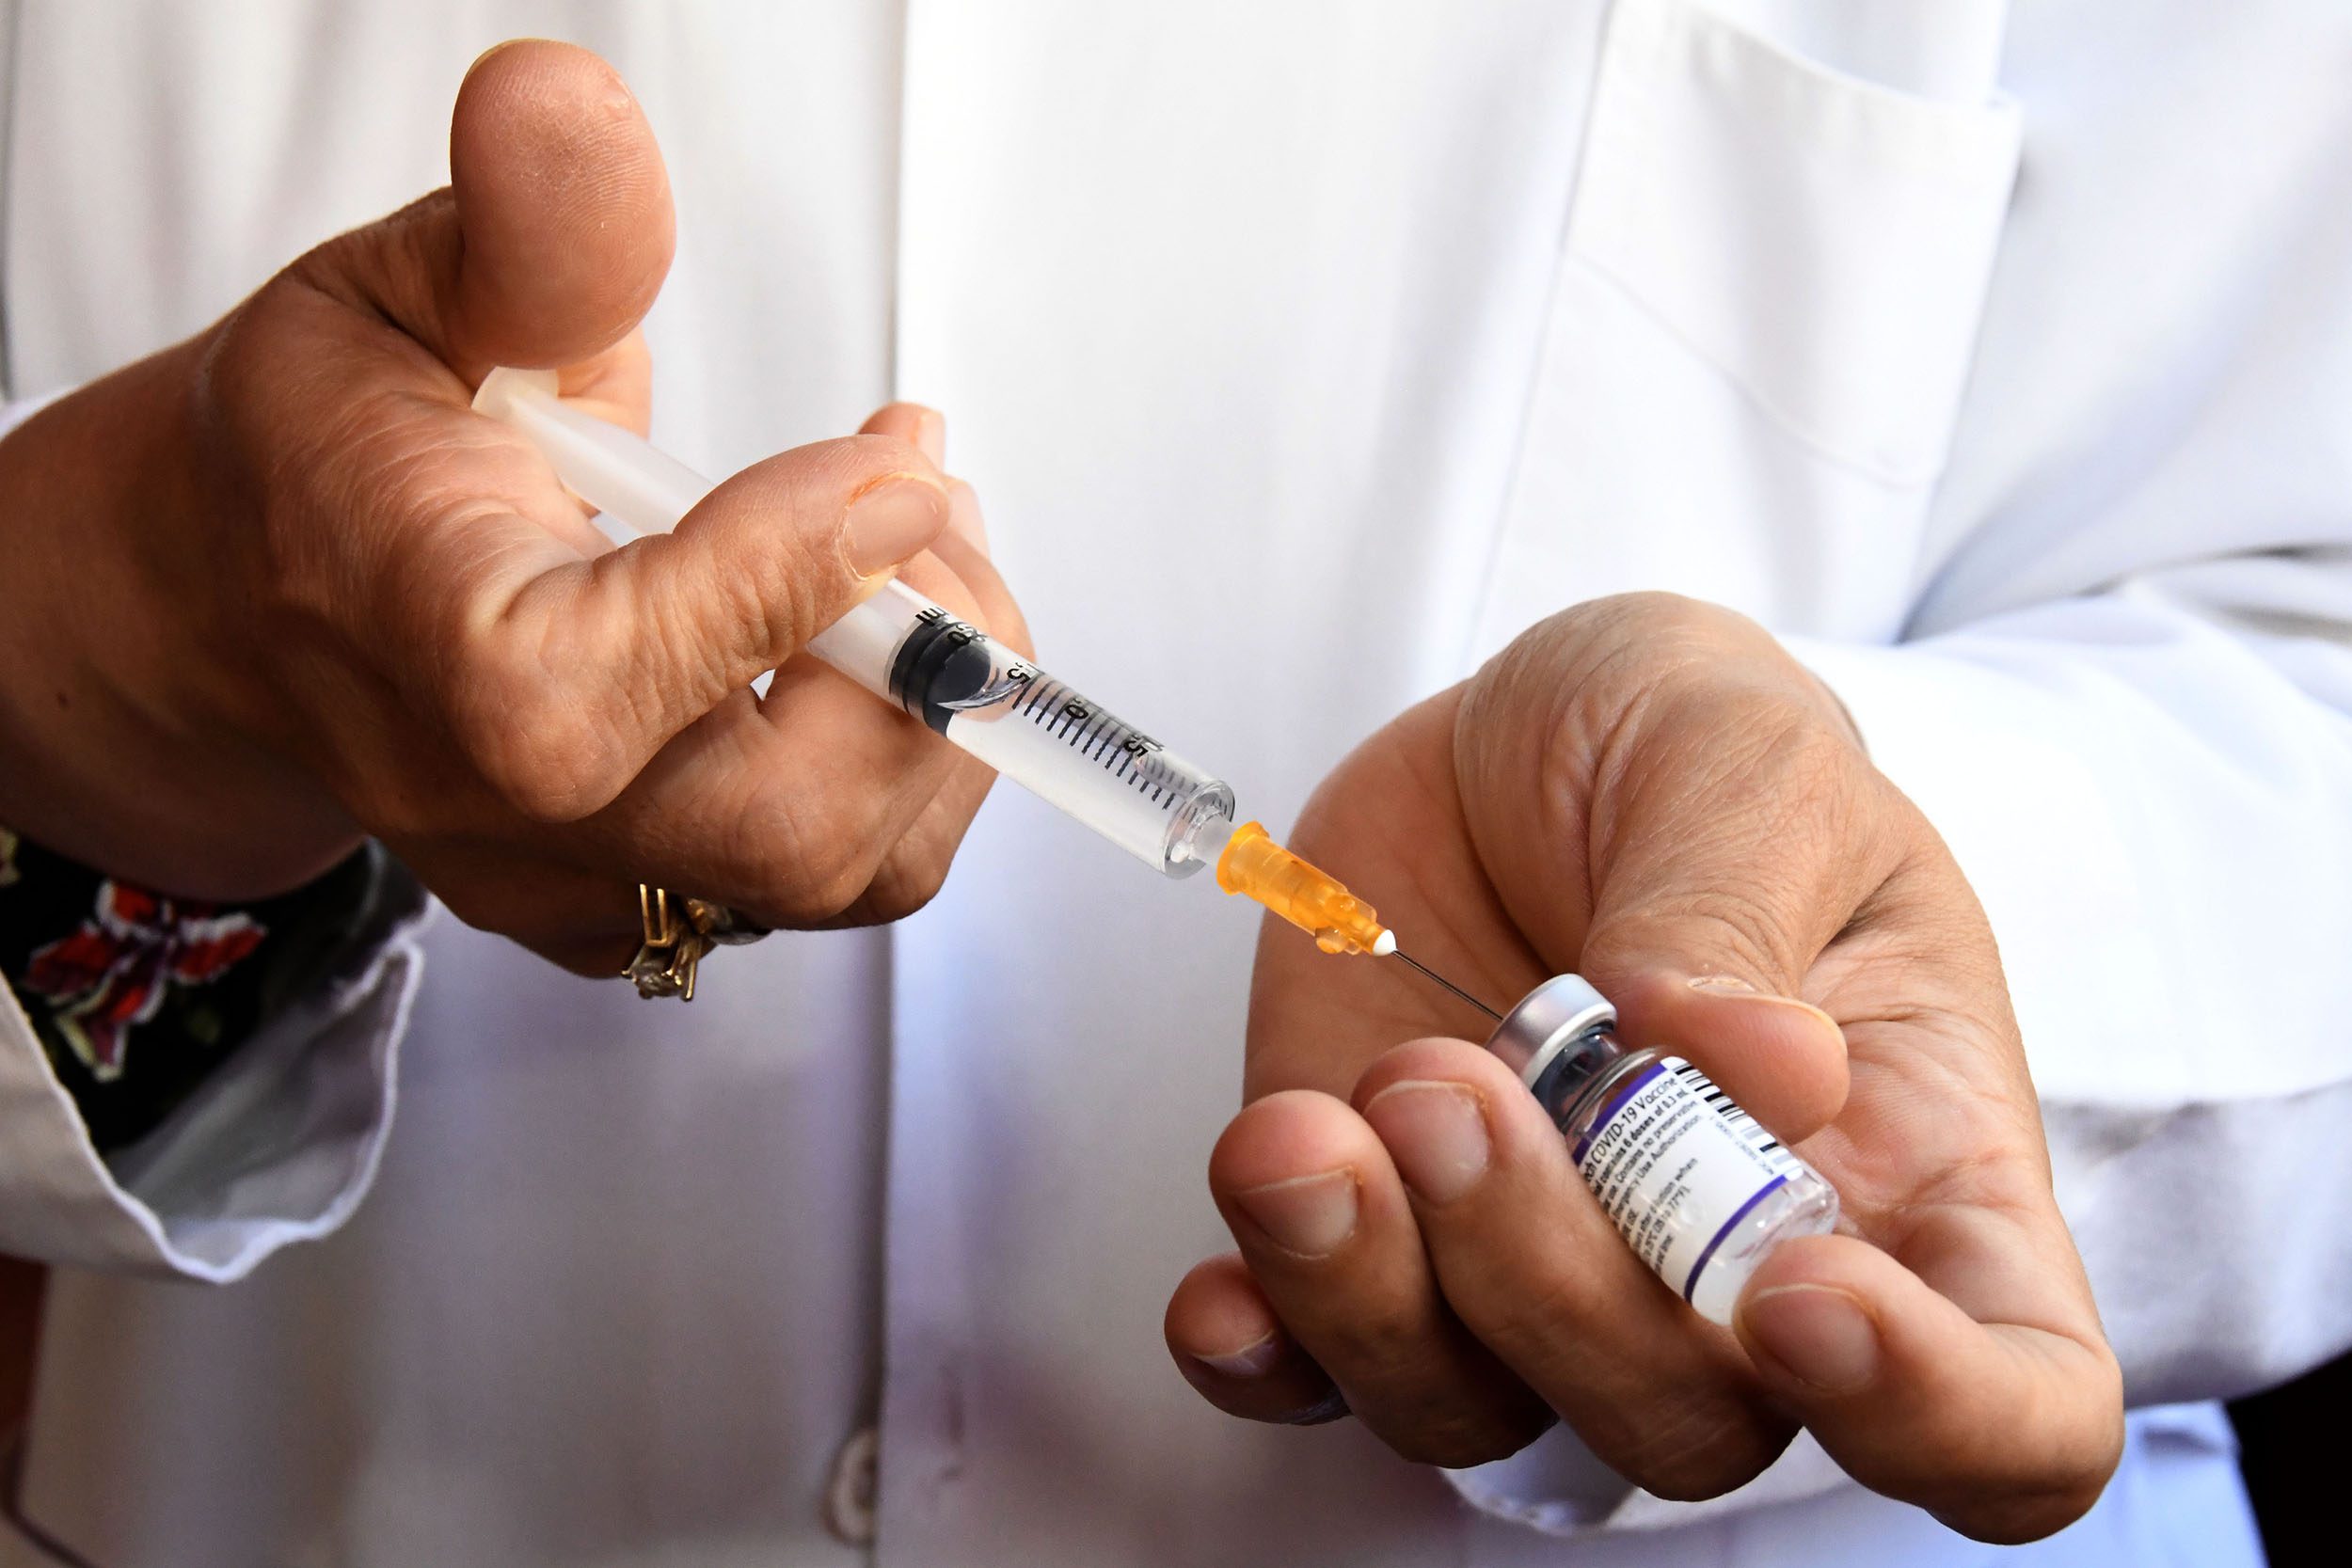 Turkey has administered over 104 million vaccine doses